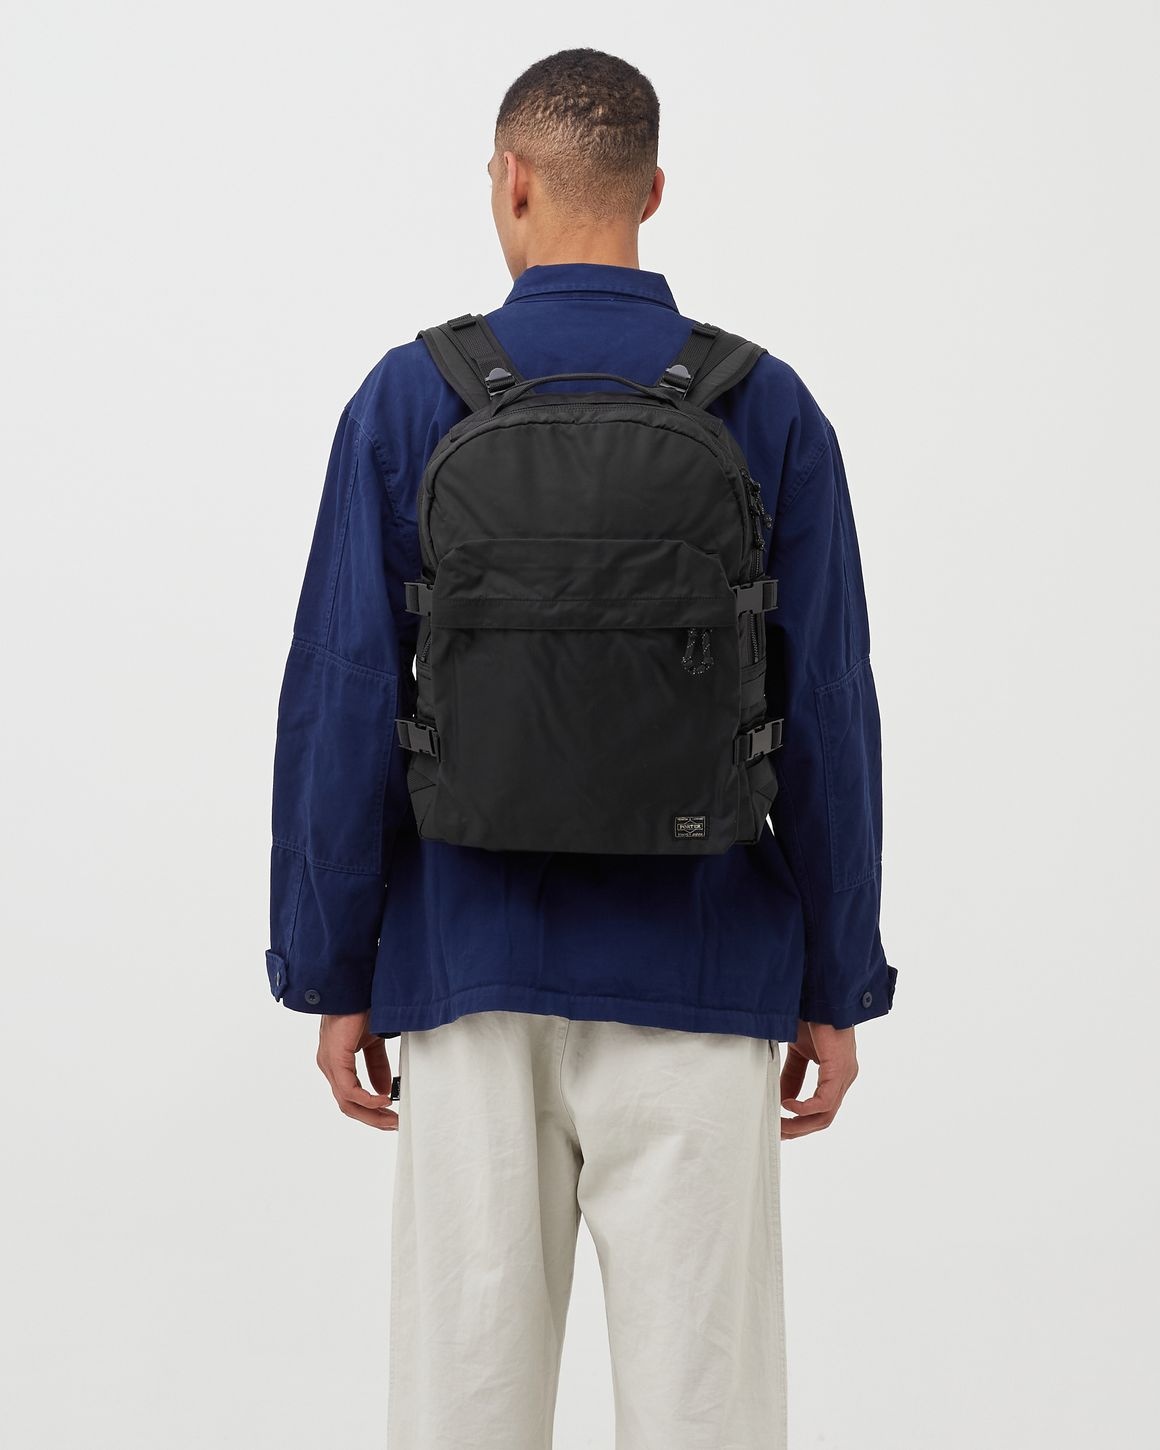 FORCE DAY PACK - 6